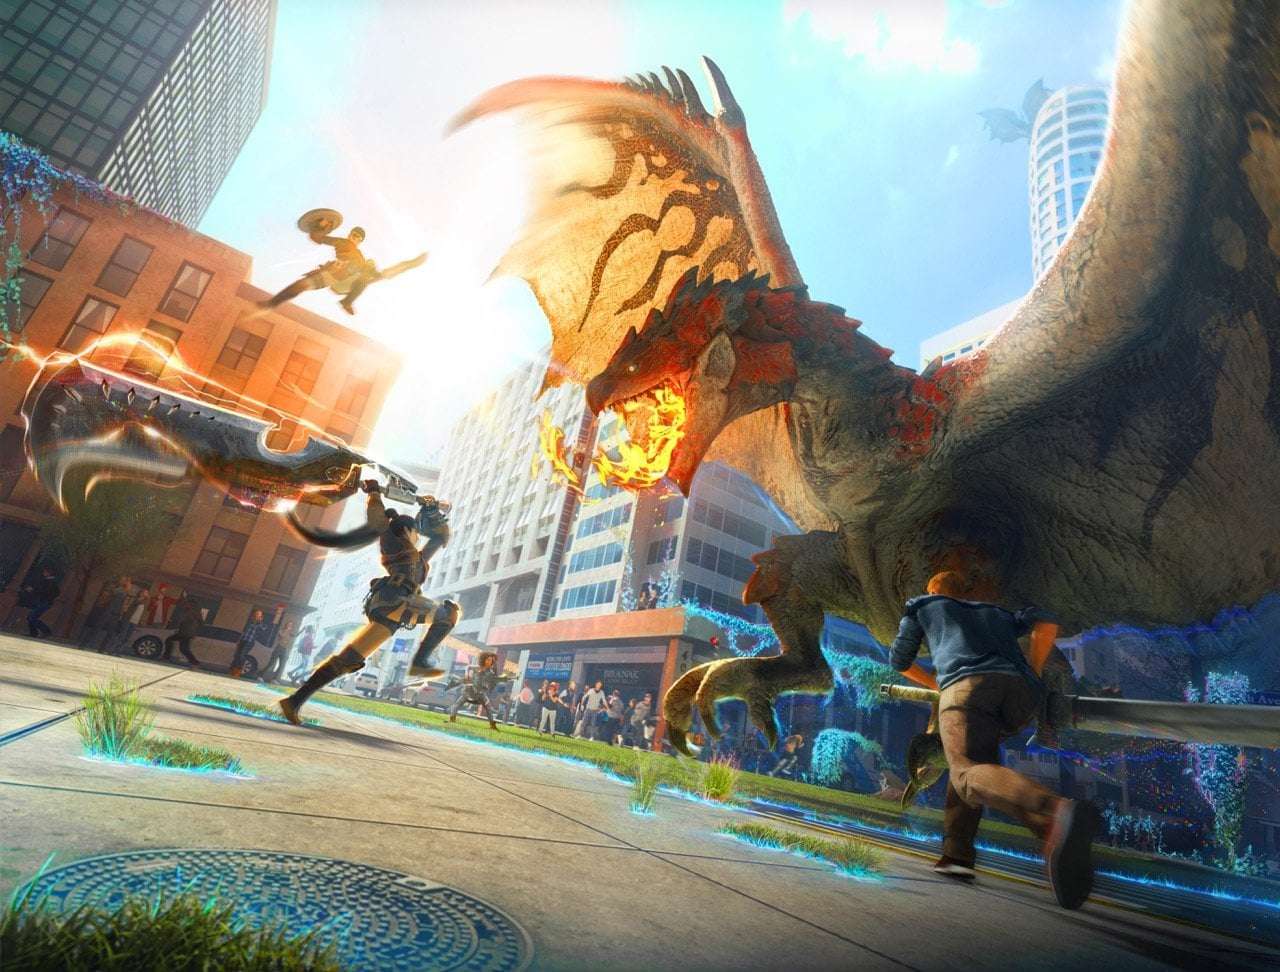 image for Introducing “Monster Hunter Now” Niantic and CAPCOM team up to bring Monster Hunter to the real world in September 2023 – Niantic Labs